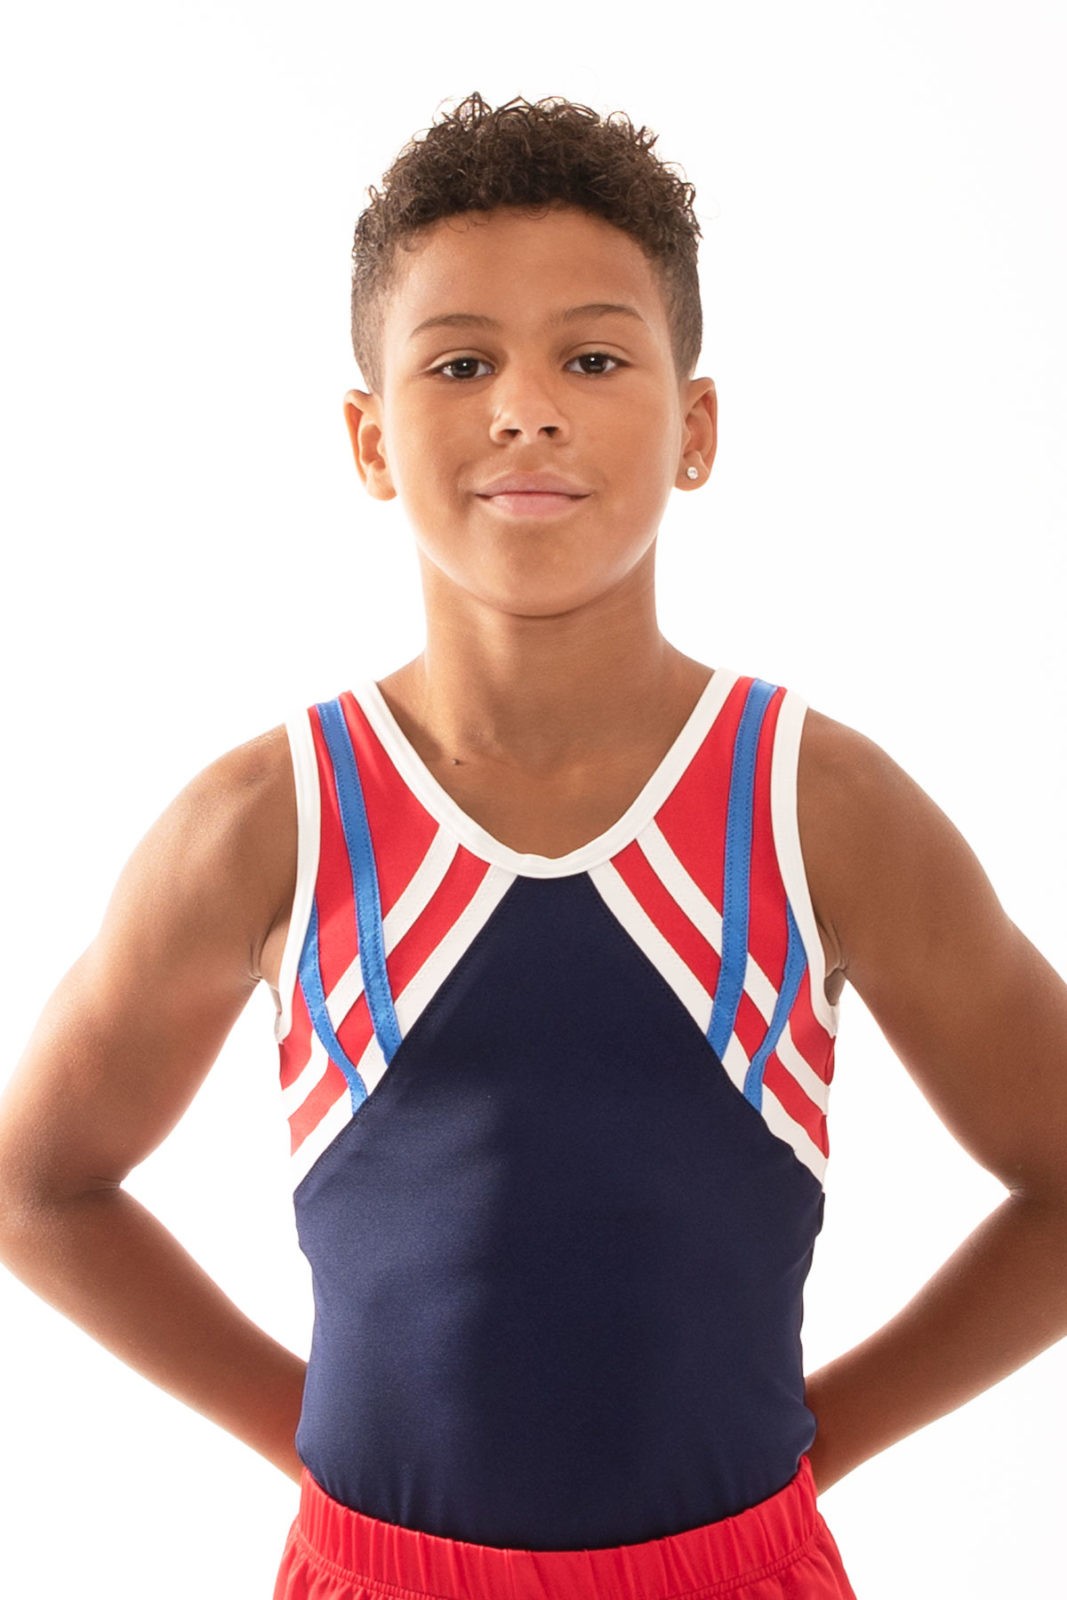 LUCAS- BV496: - Boys navy white red and sapphire bodice leotard - A ...